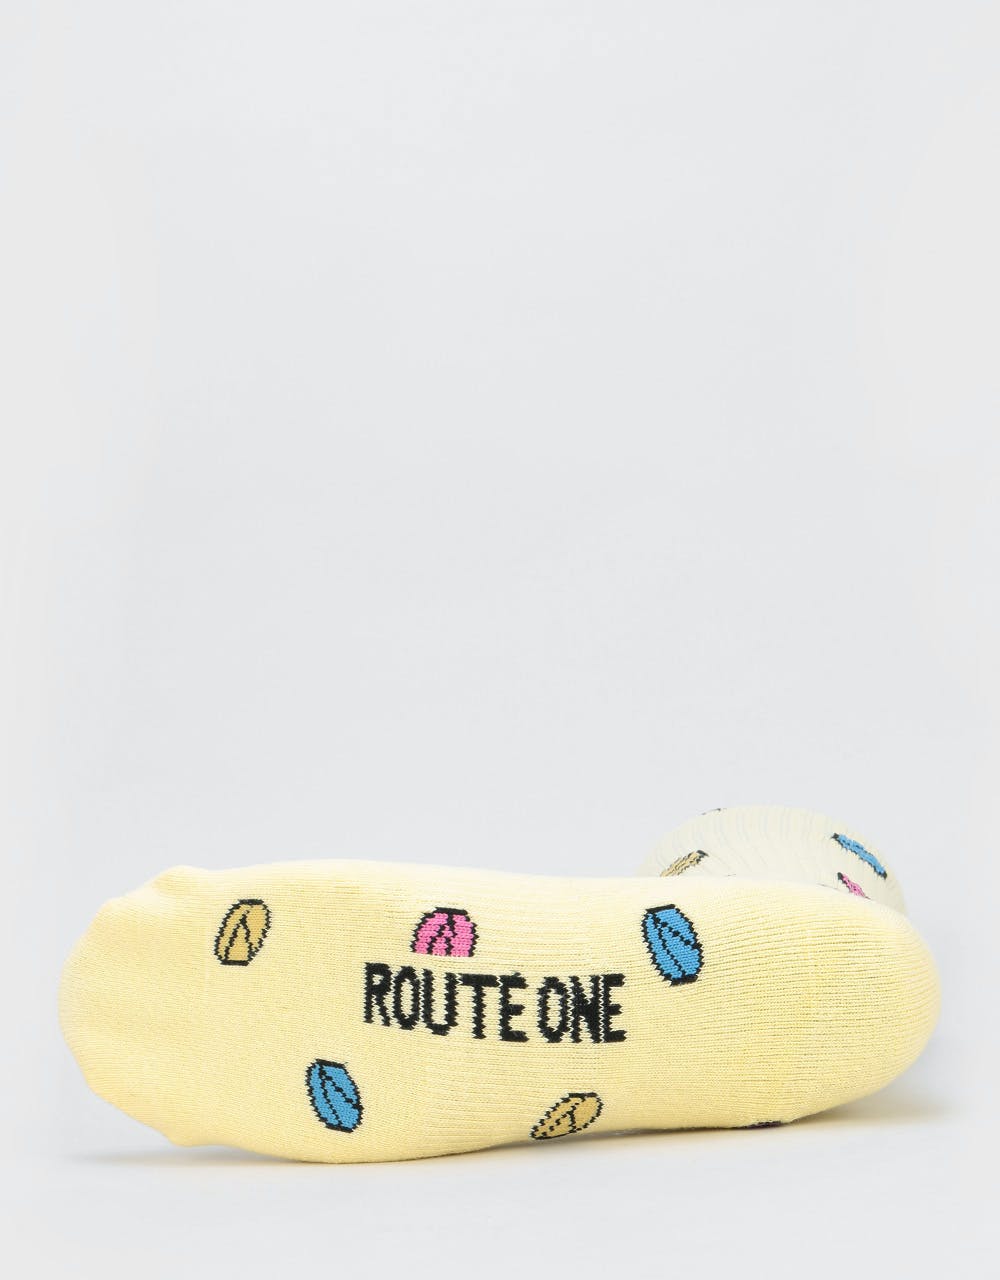 Route One Pillz Socks - Pale Yellow